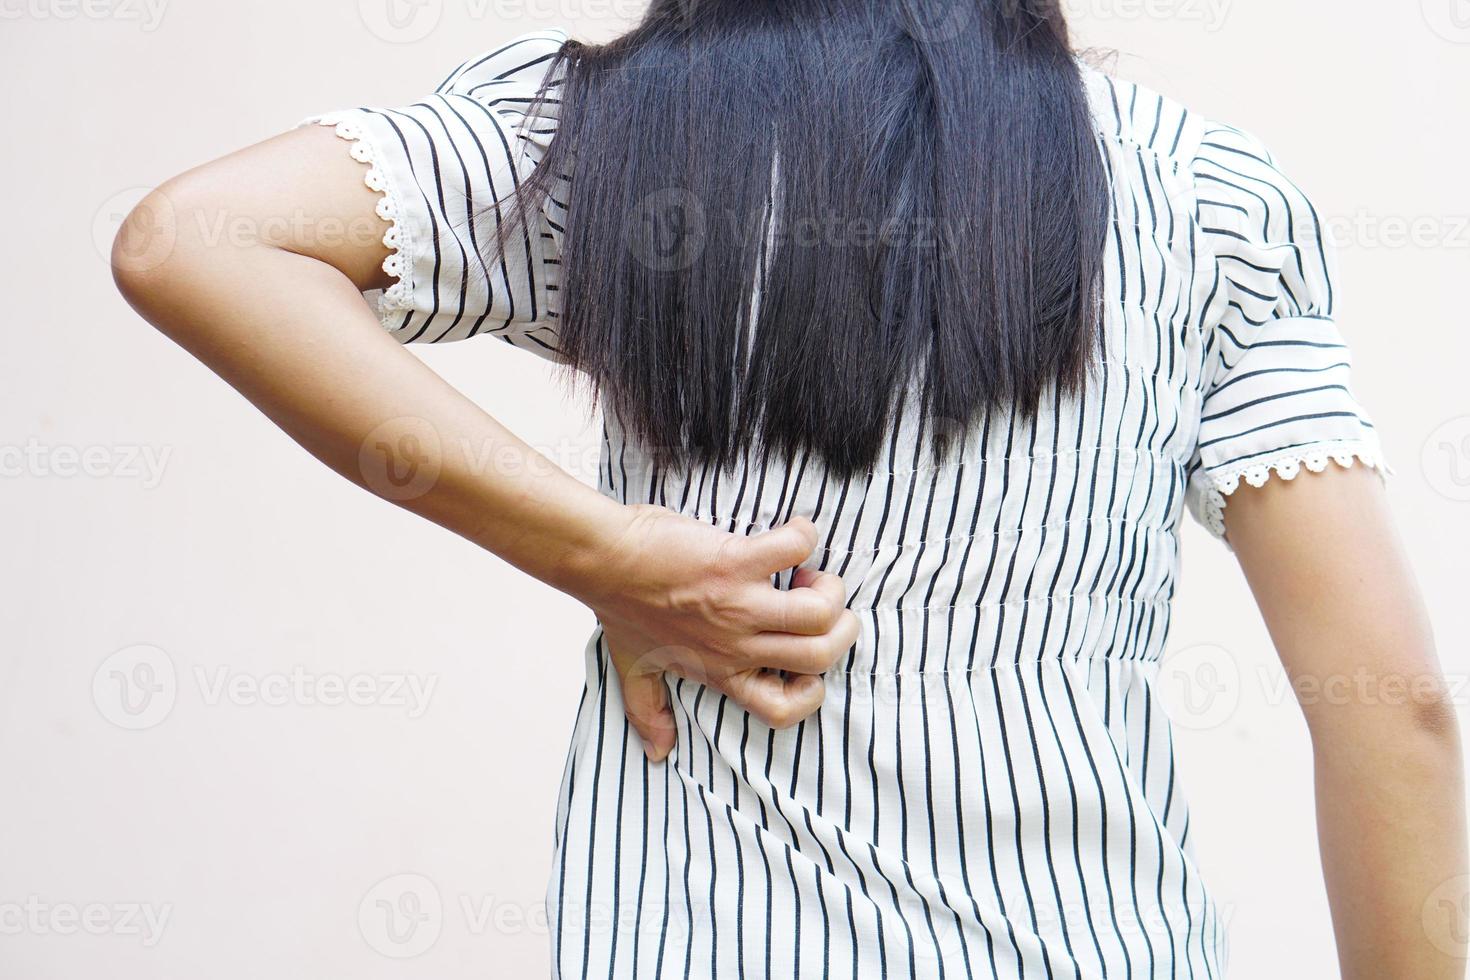 Backside of white woman back pain and ache concept,Itchy Asian woman in the back photo